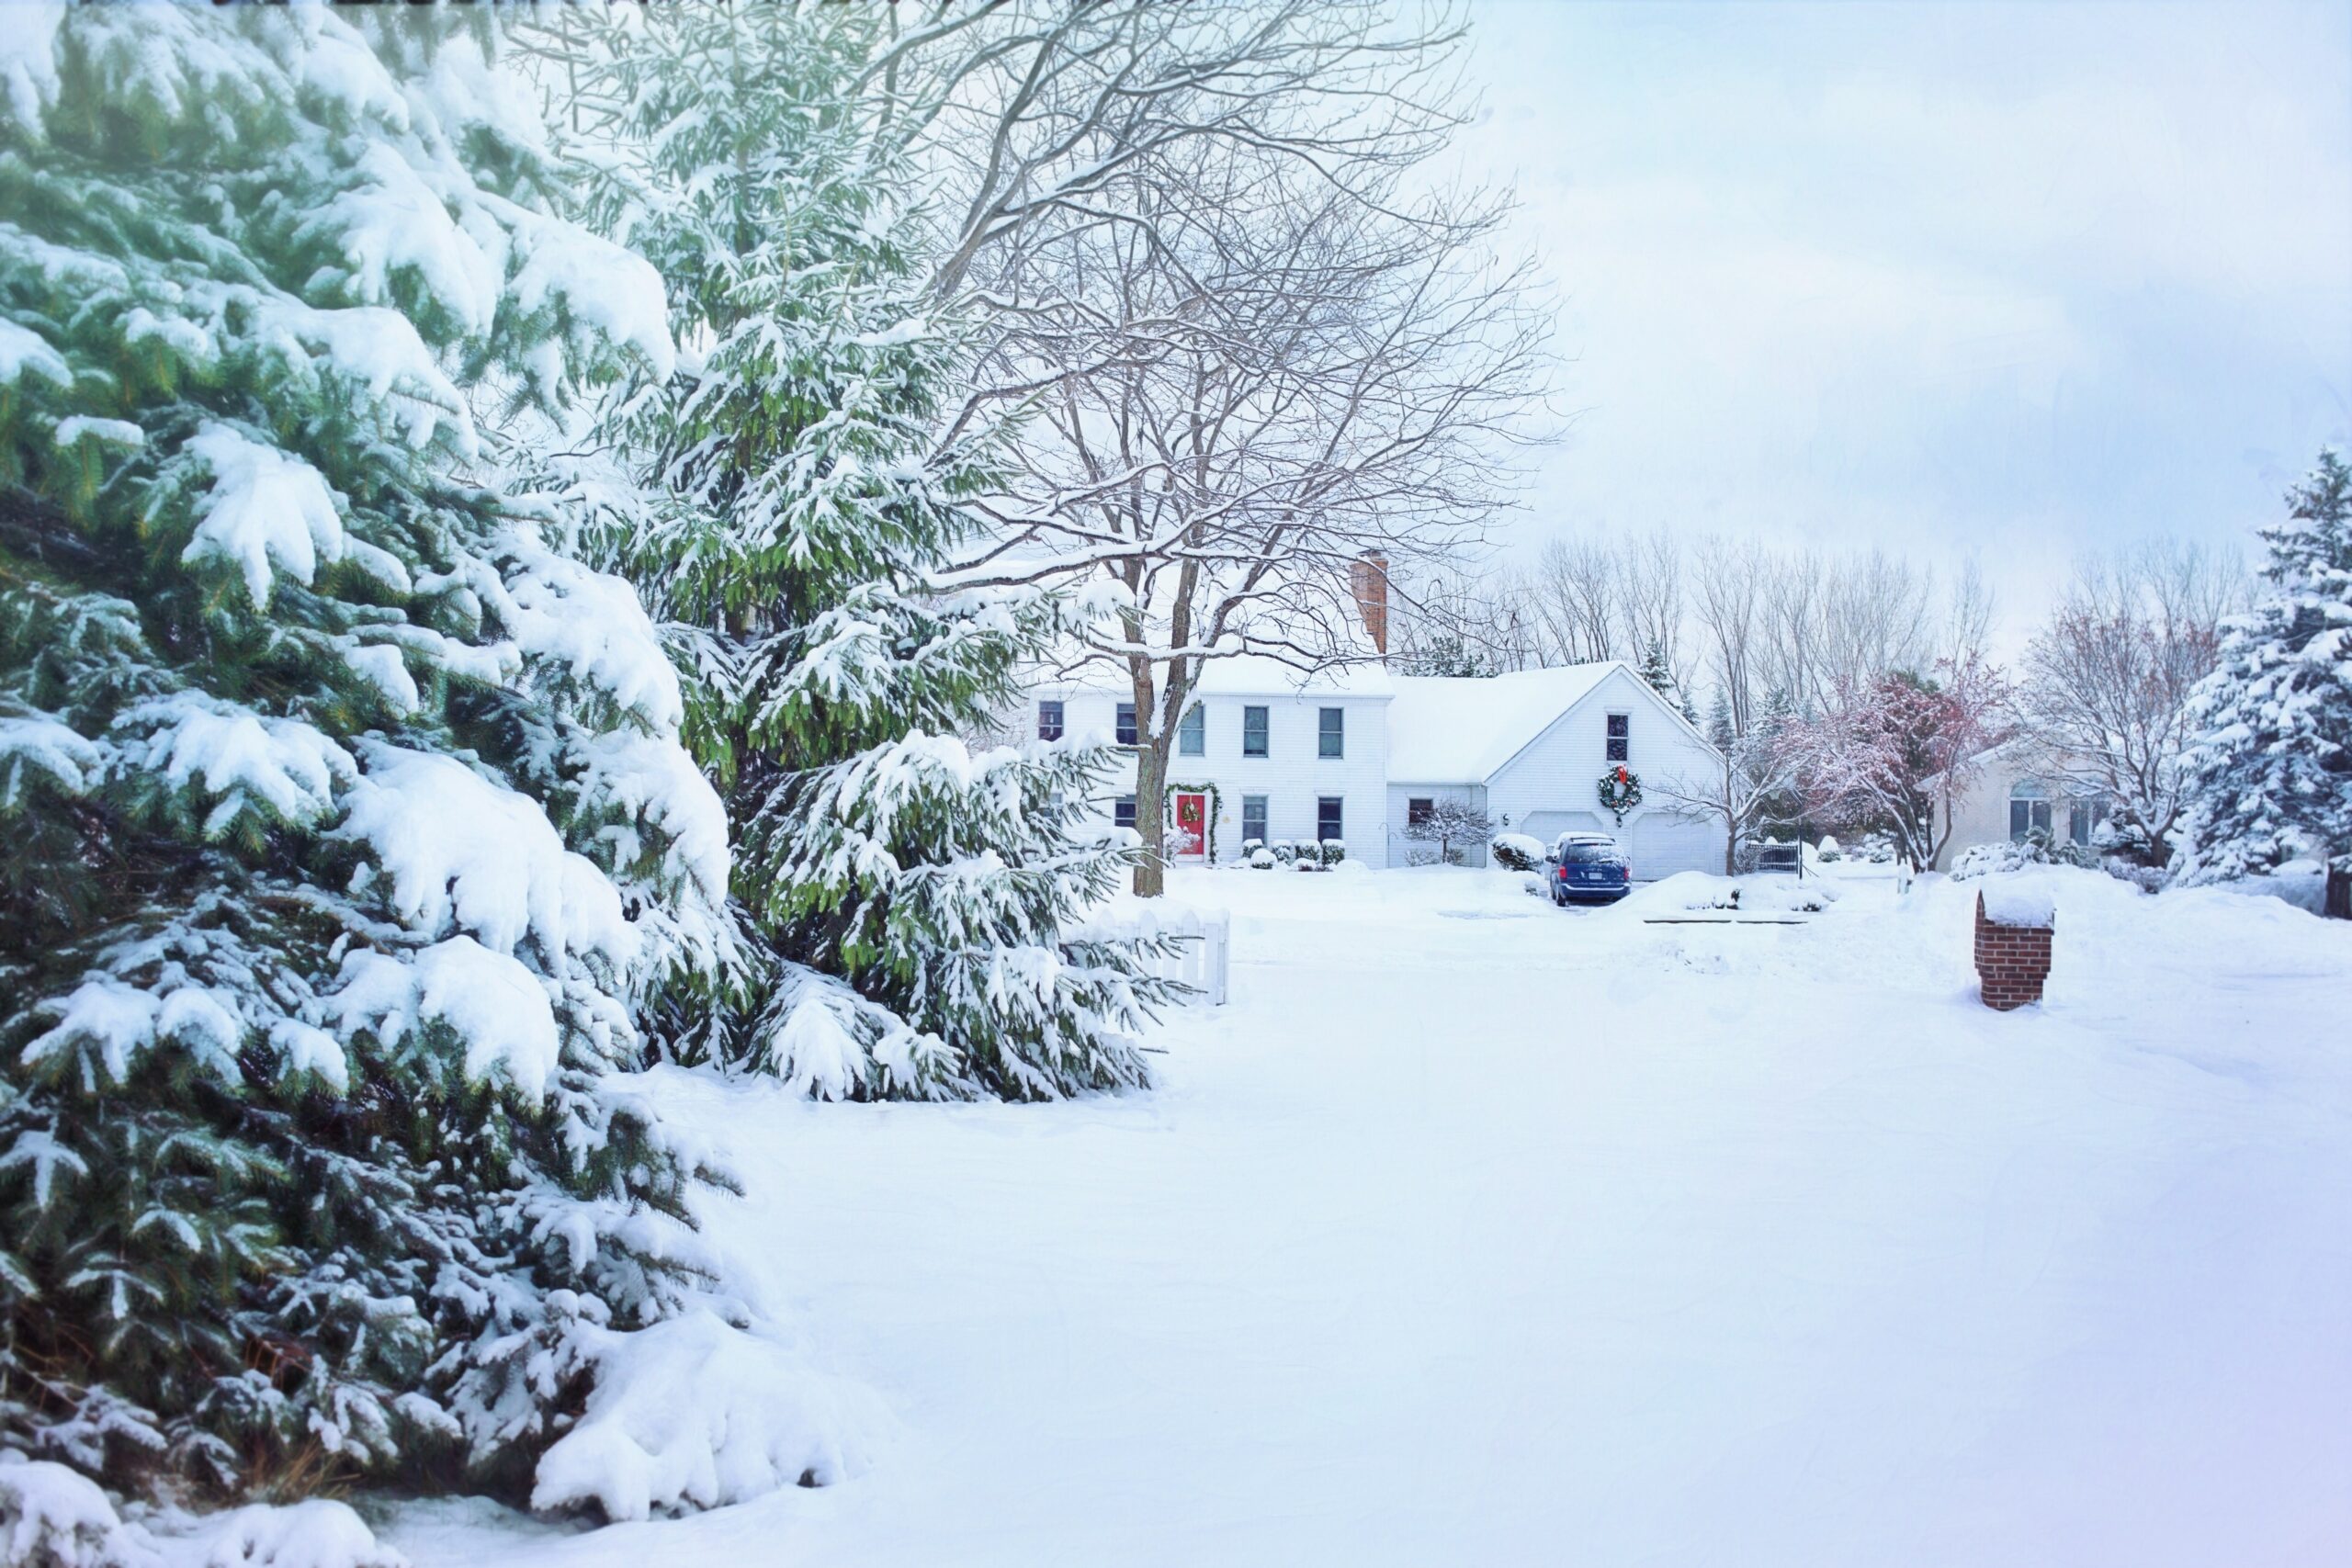 How Do Snow & Ice Impact Your Roof?